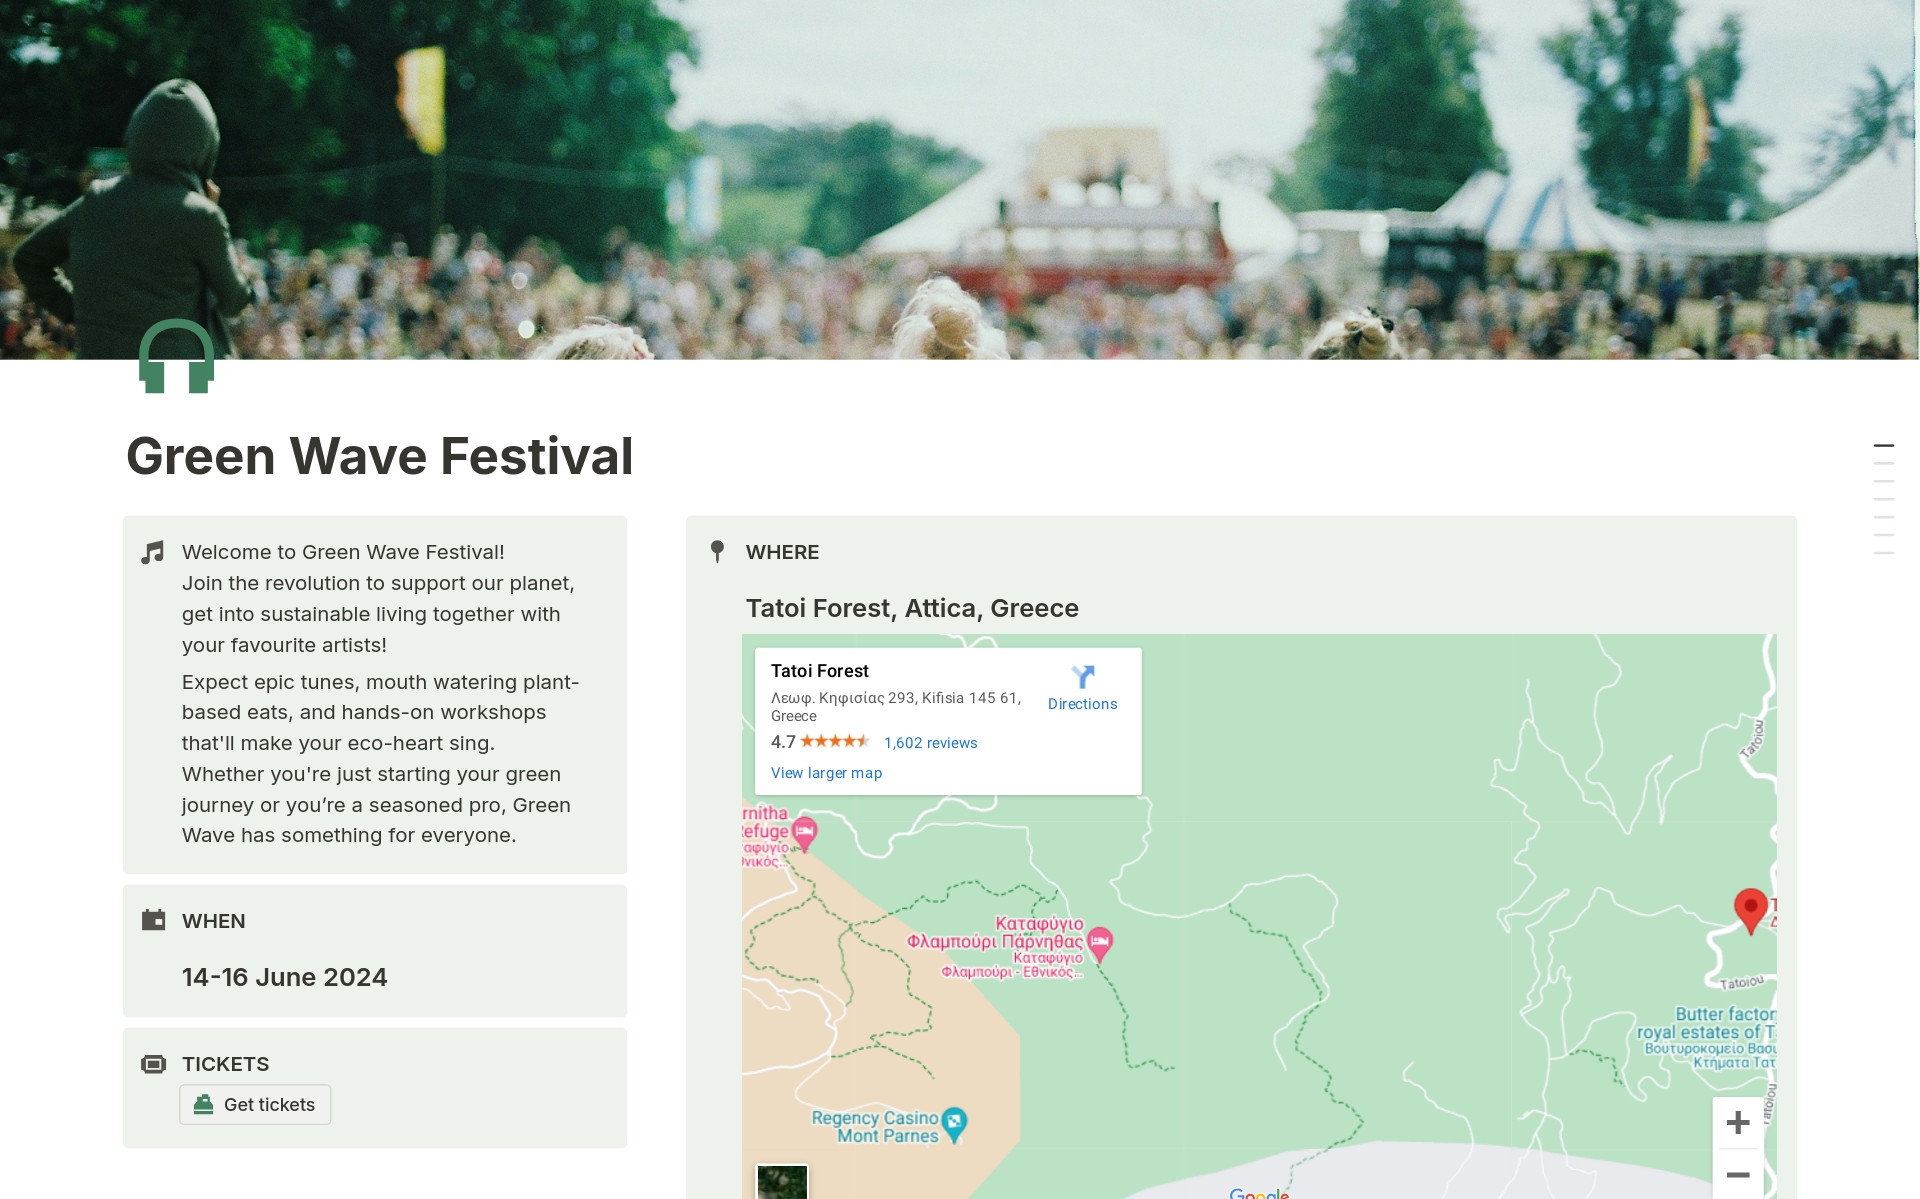 An events website template designed for a summer music festival, featuring lineup, schedule, and ticket info.